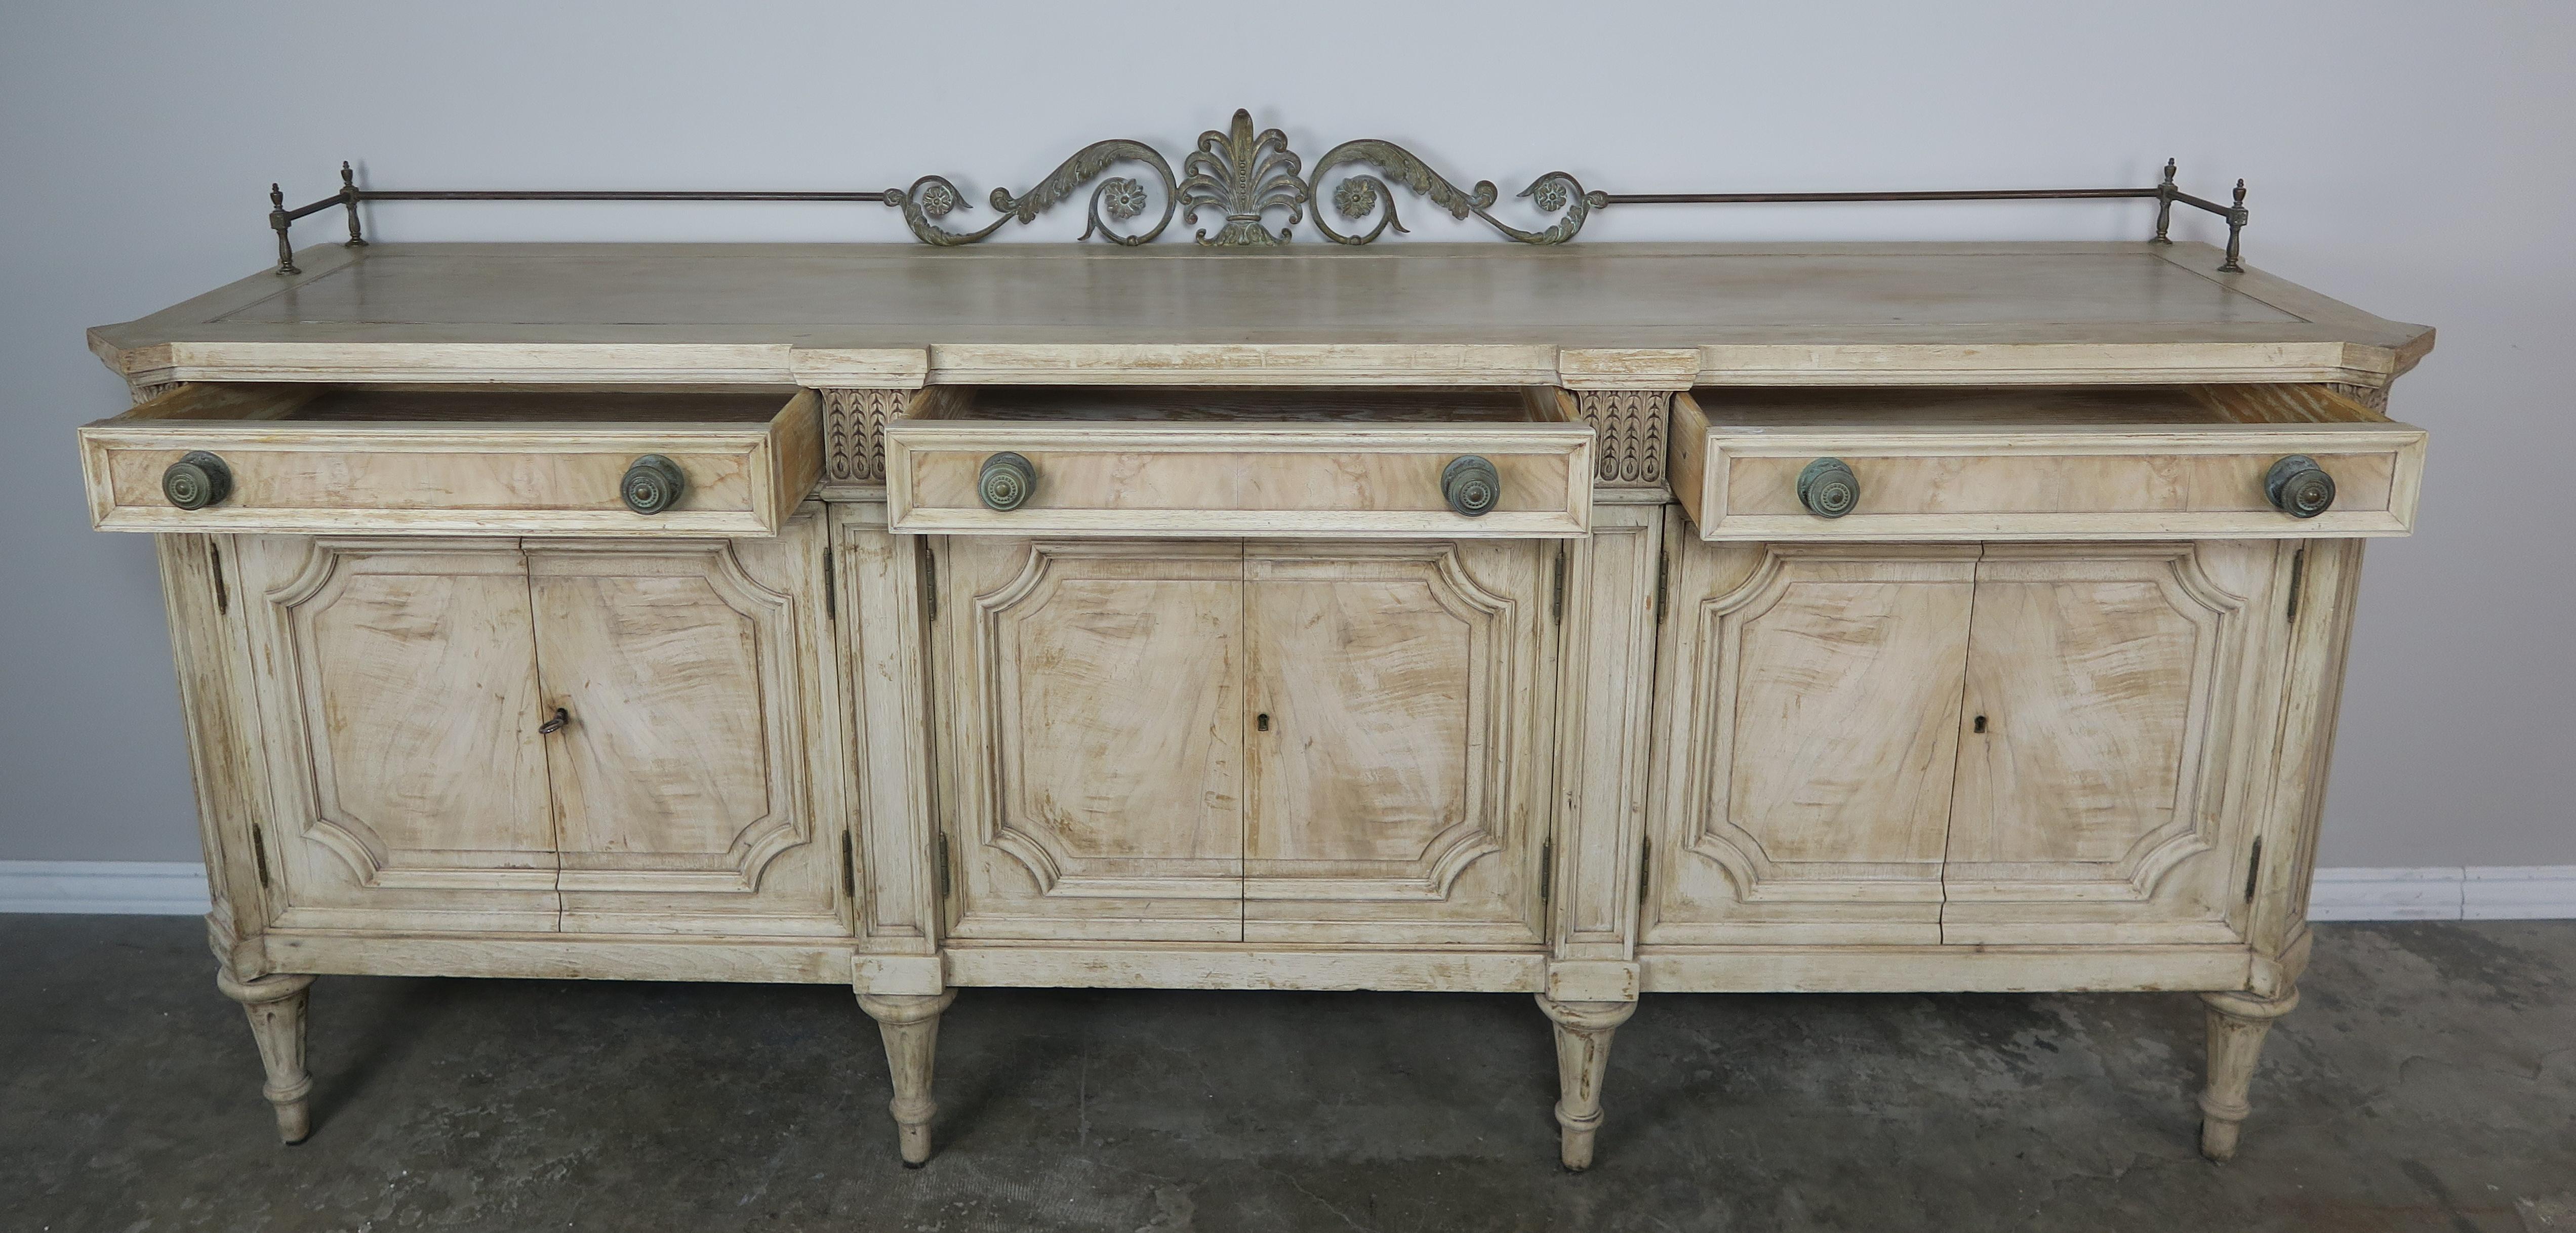 Early 20th Century French Louis XVI Neoclassical Style Sideboard, circa 1900s